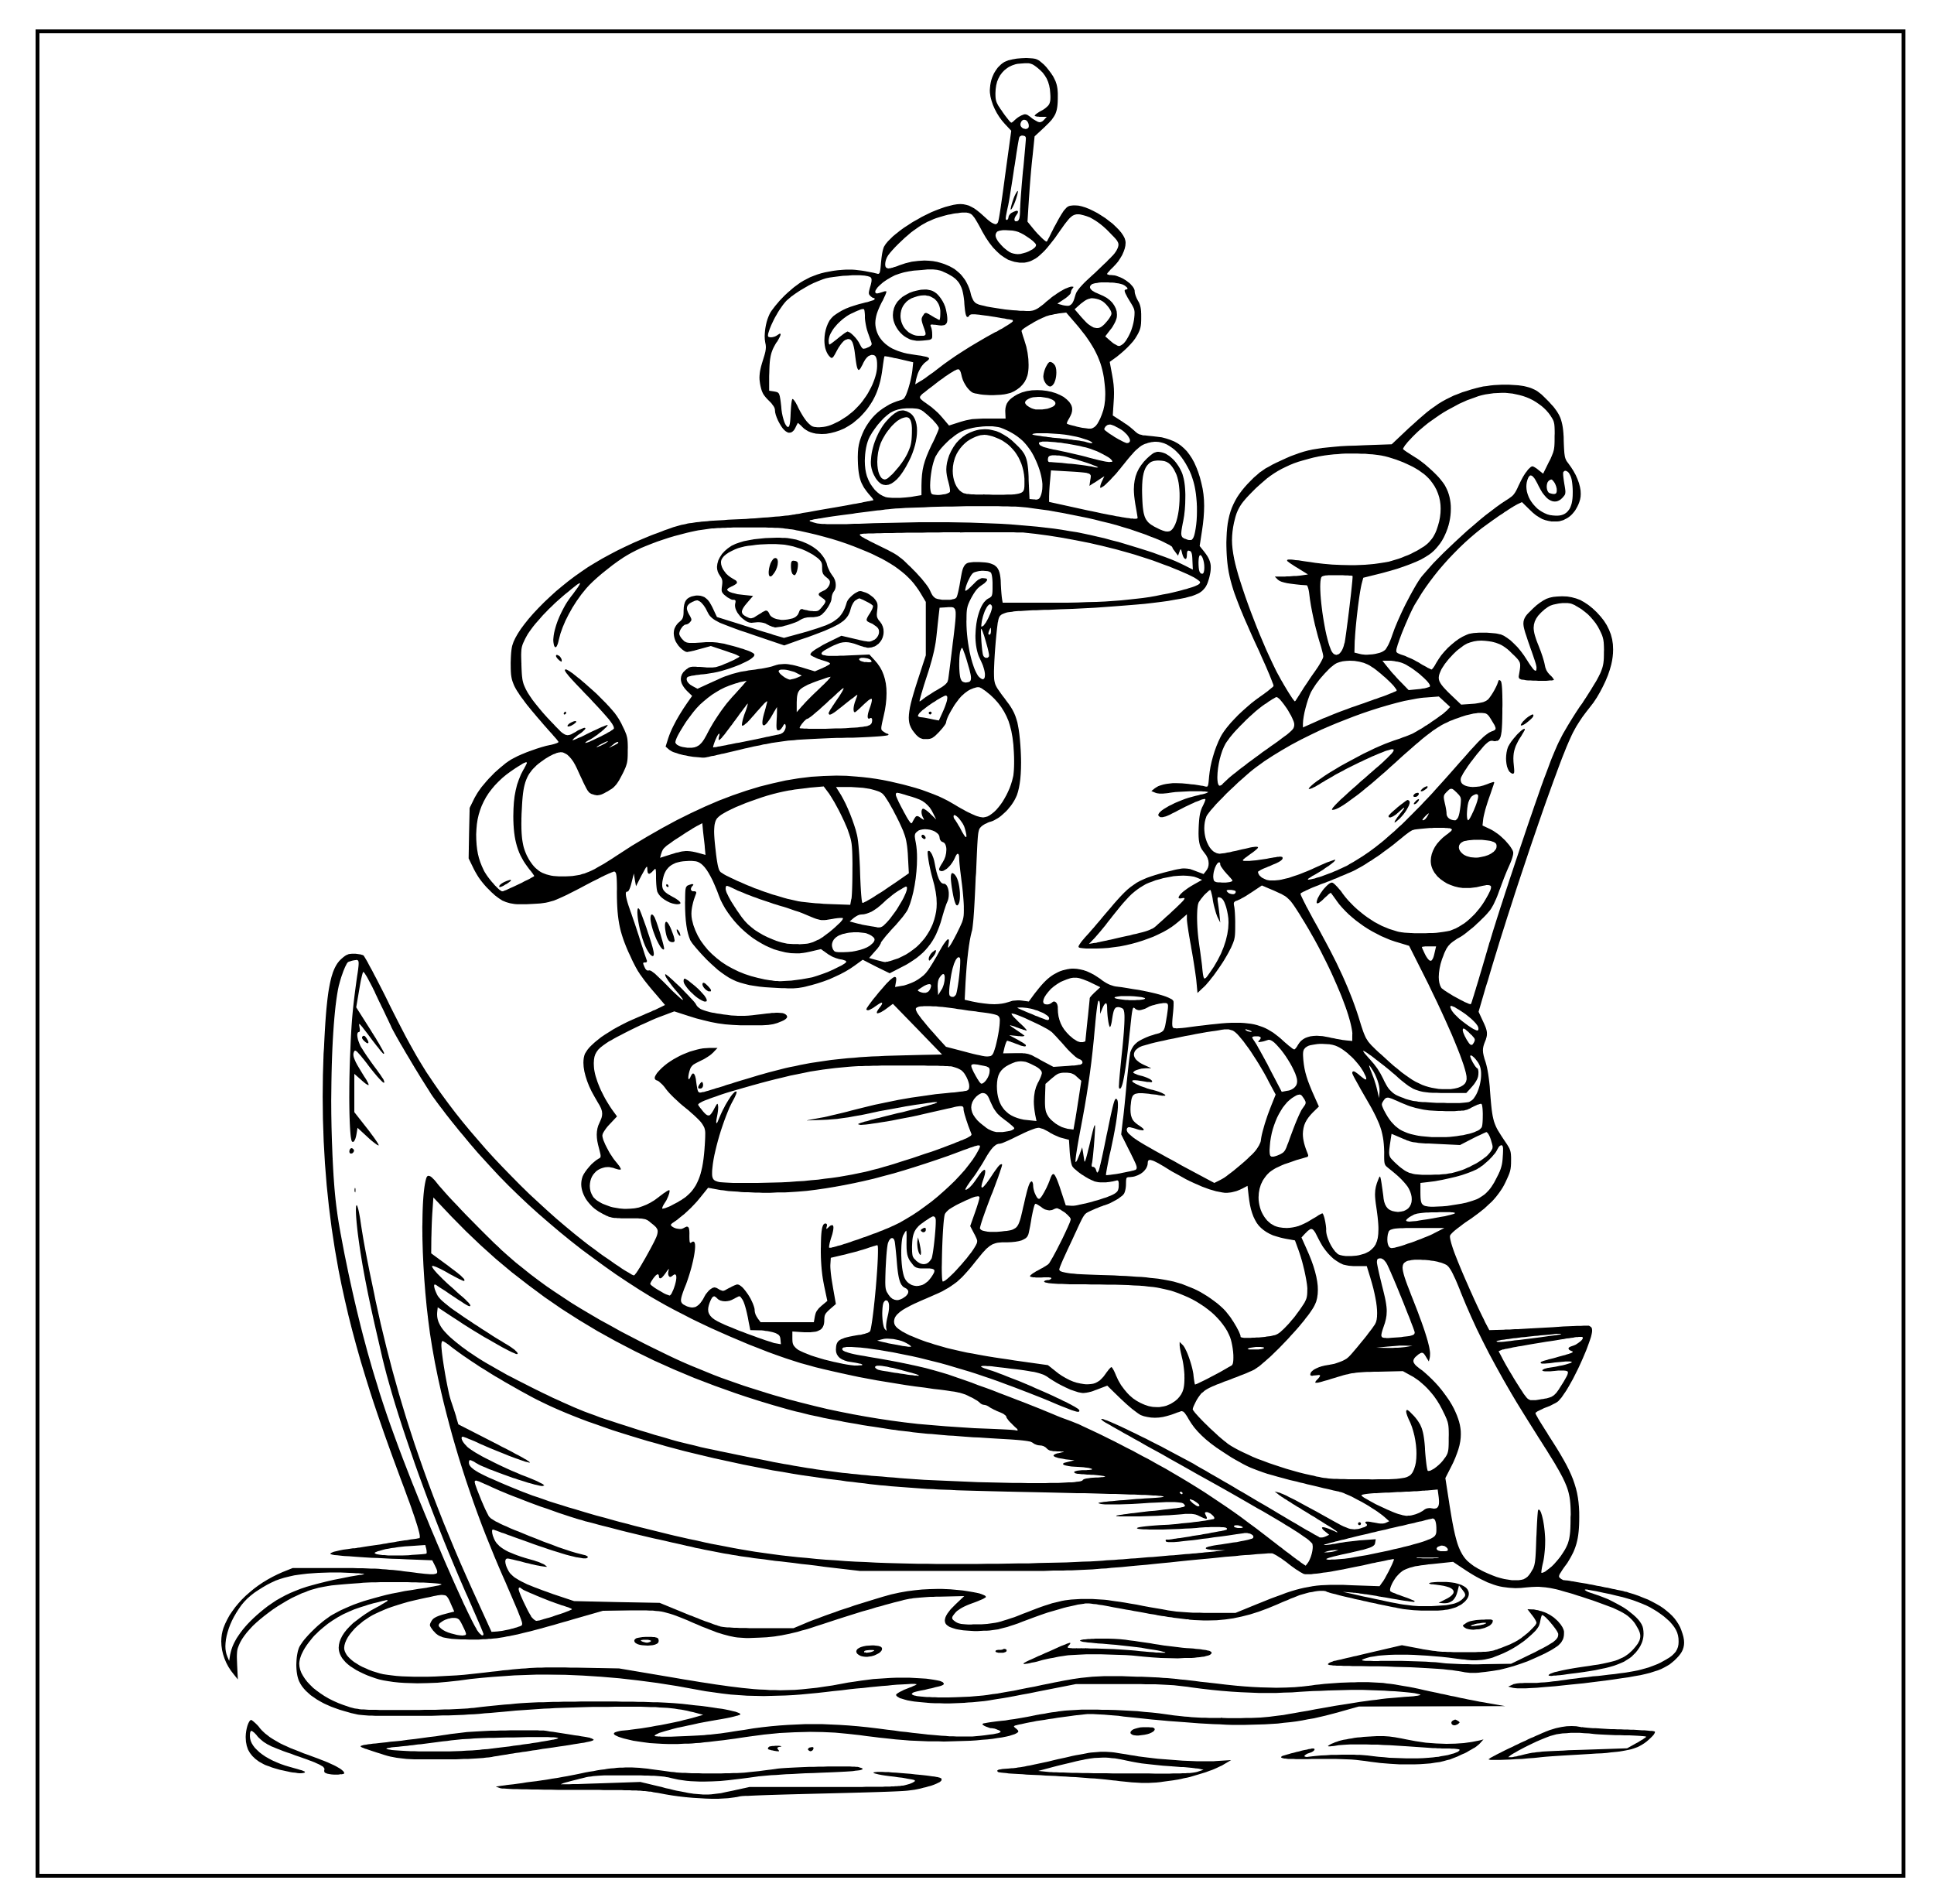 Printable Garfield Odie as Pirates Coloring Page for kids.